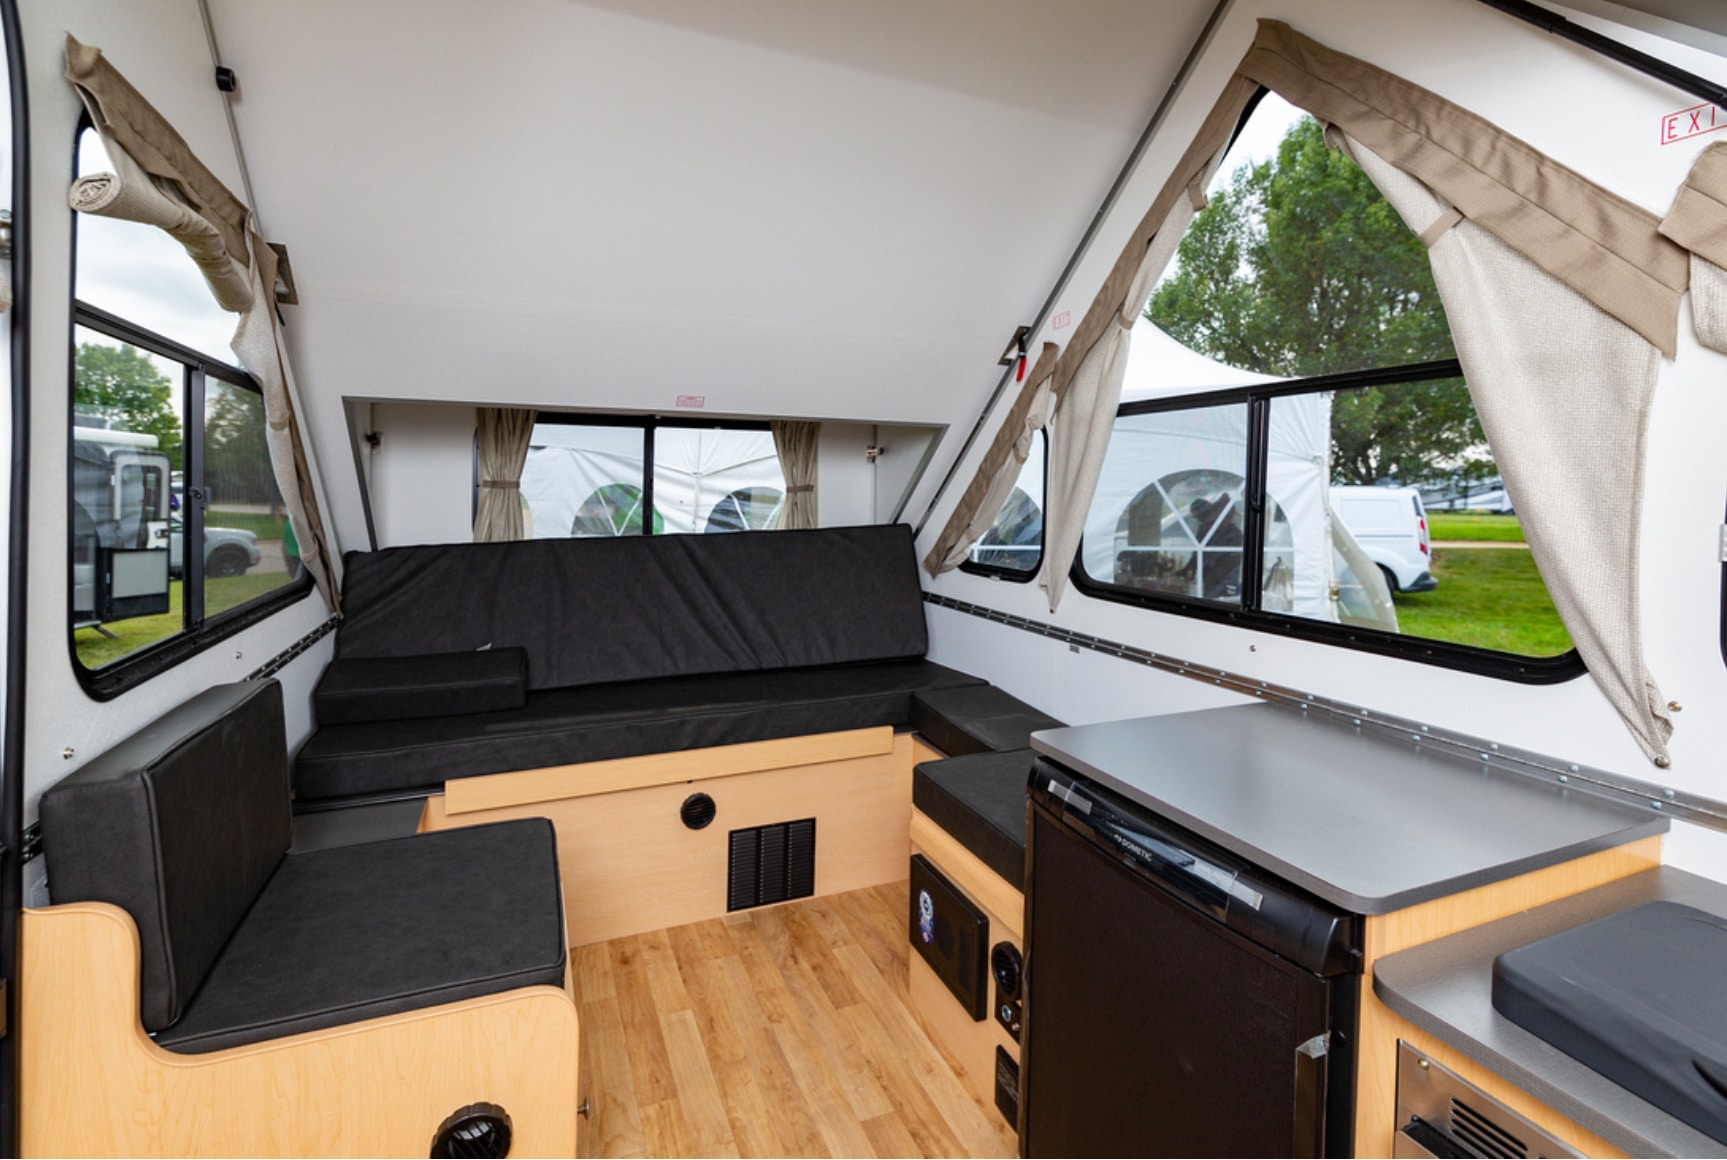 The interior of an rv with a couch and table.